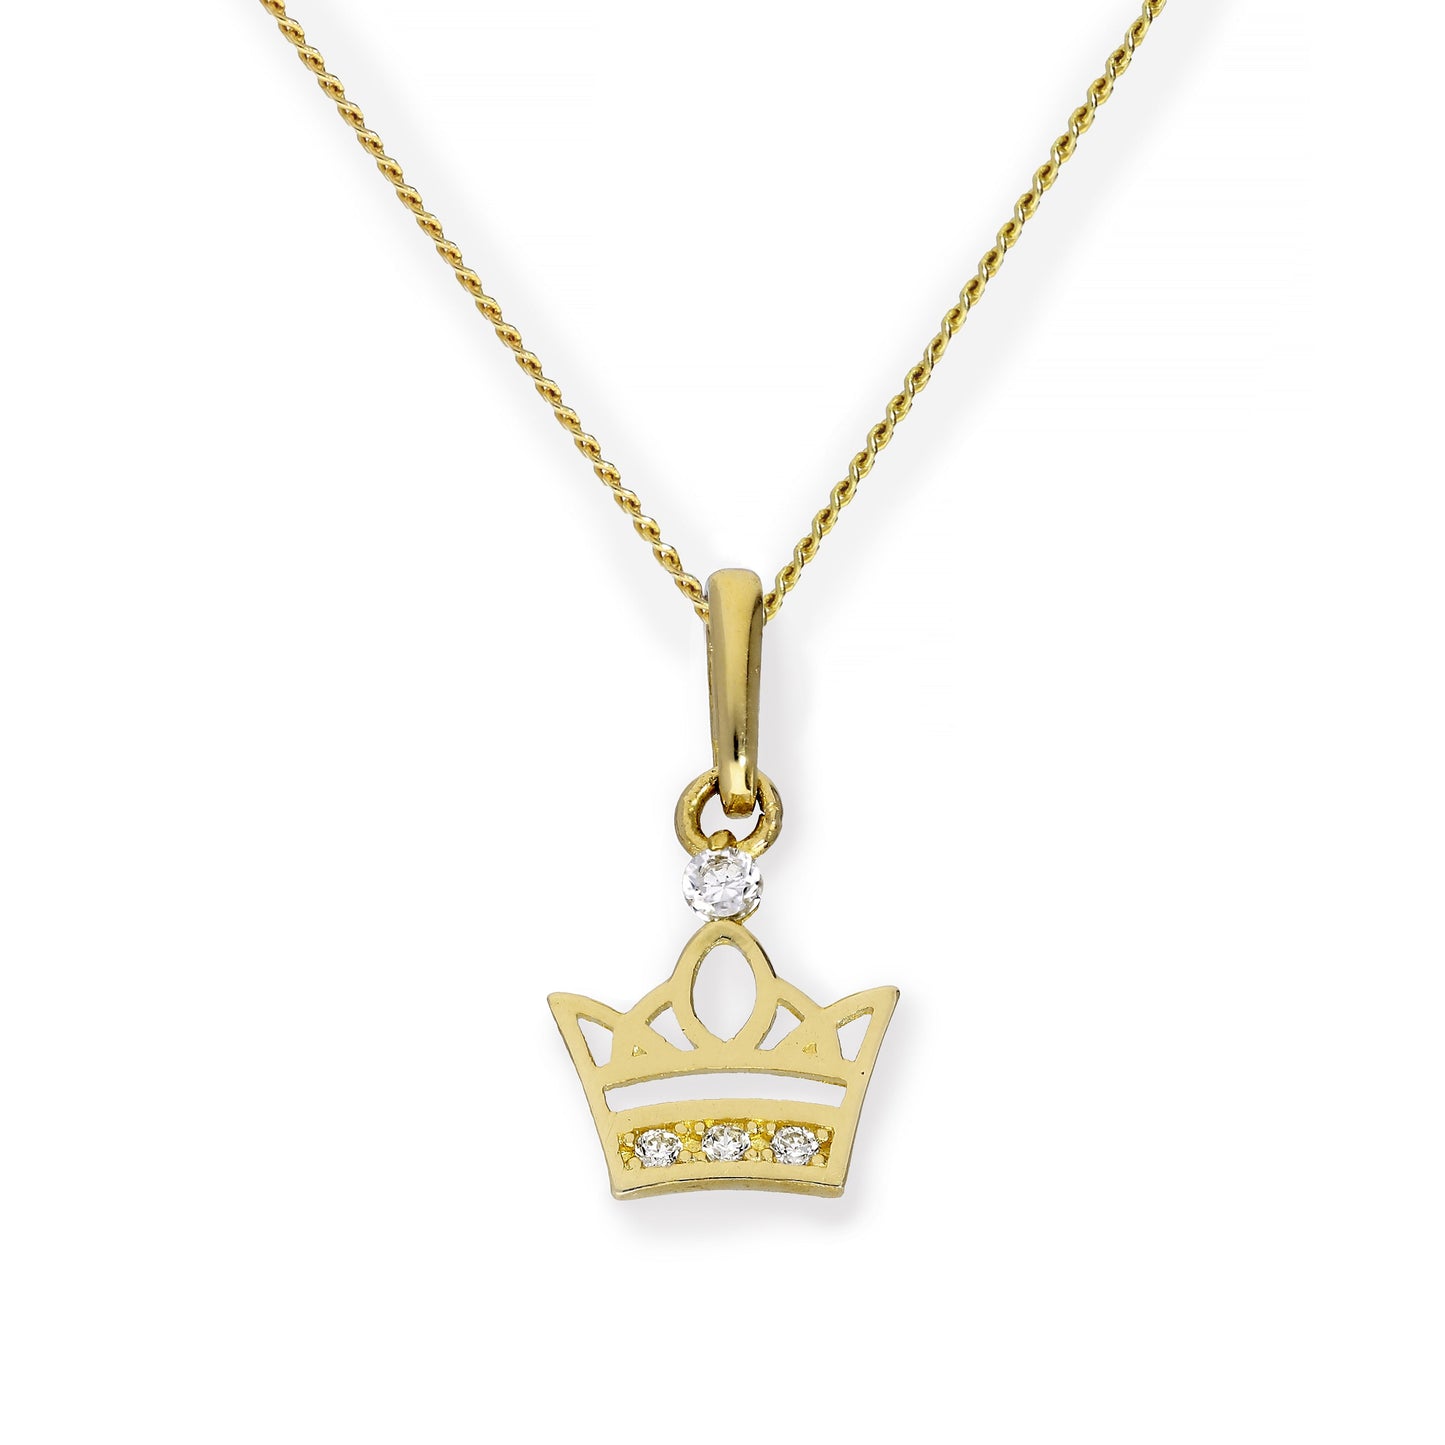 9ct Gold & Clear CZ Crystal Royal Crown Pendant Necklace